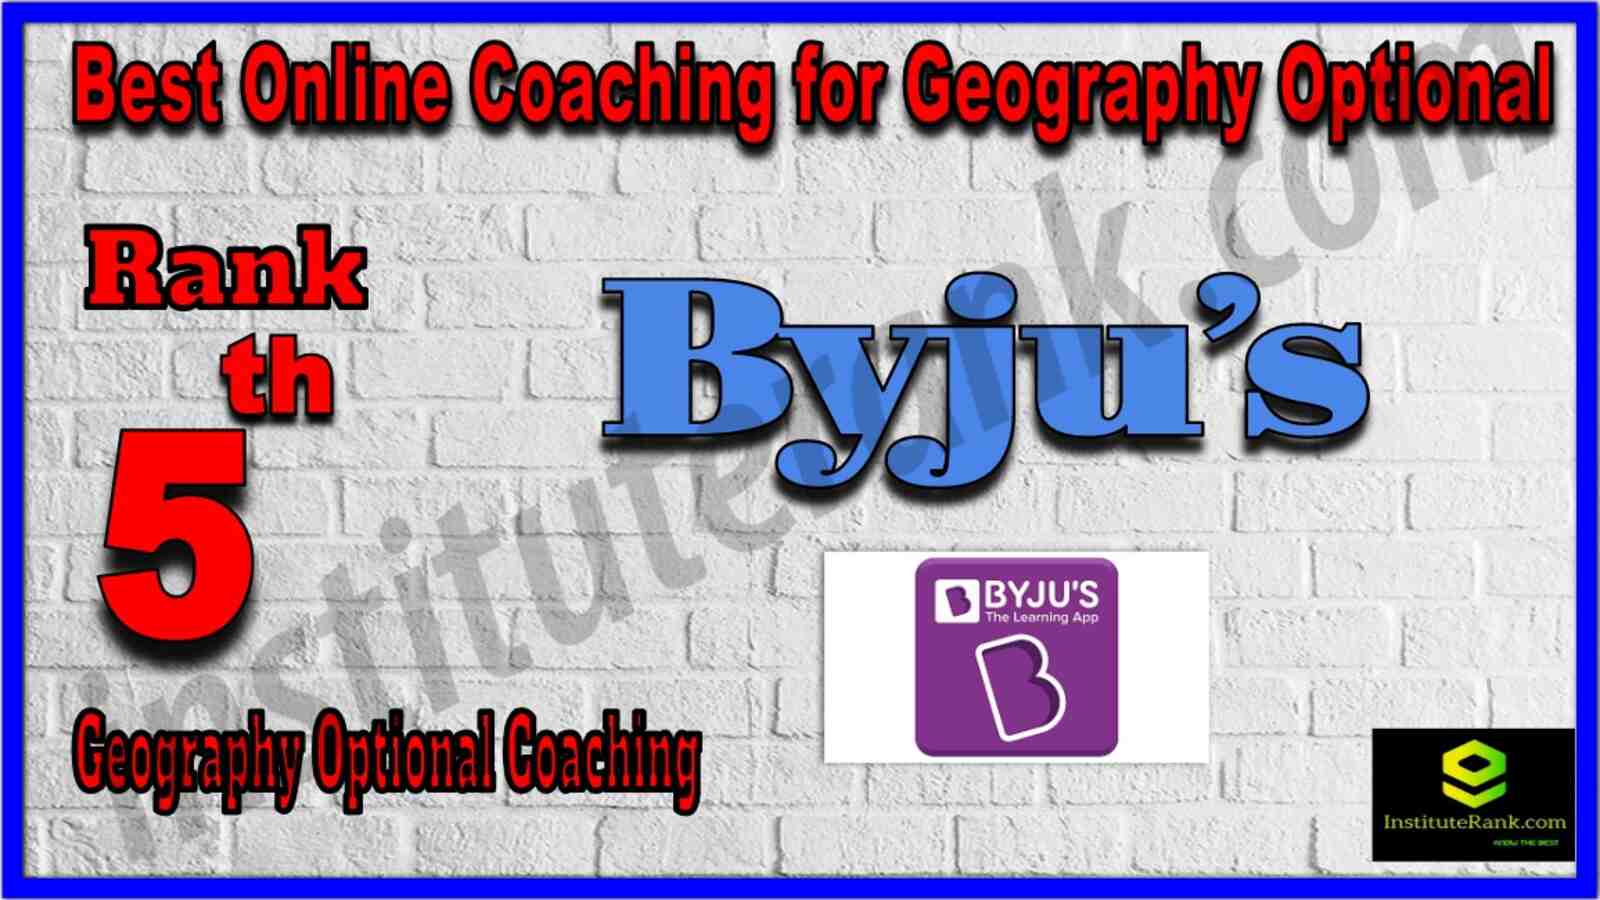 Rank 5 Best Online Coaching for Geography Optional